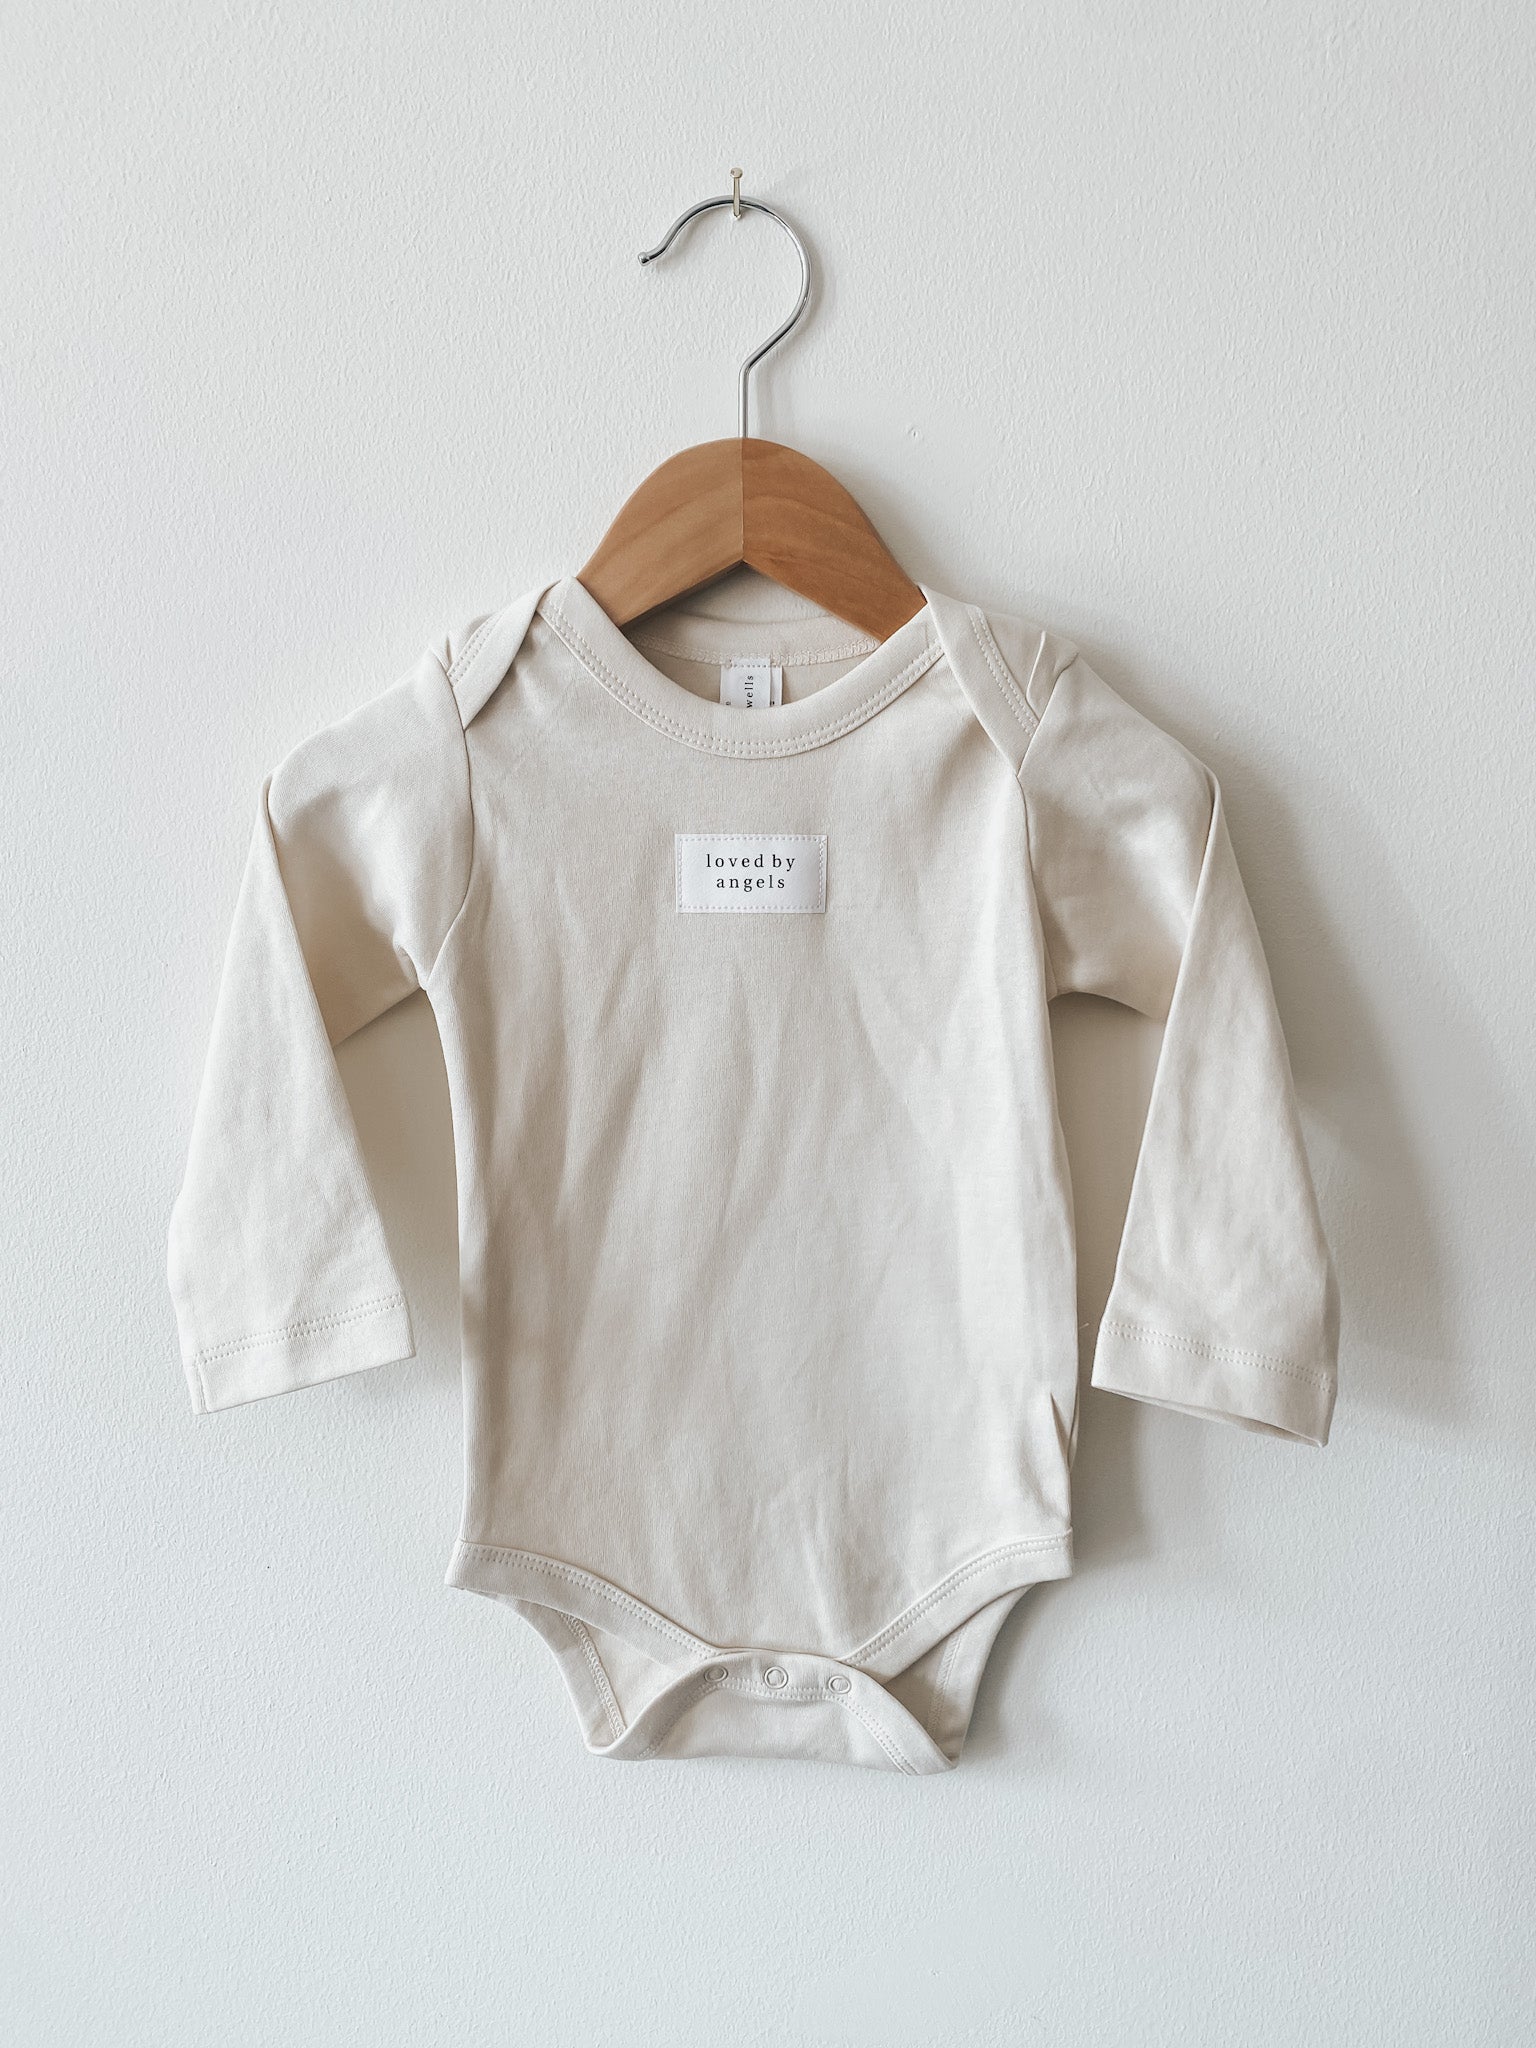 Classic Long Sleeve Bodysuit | Loved By Angels